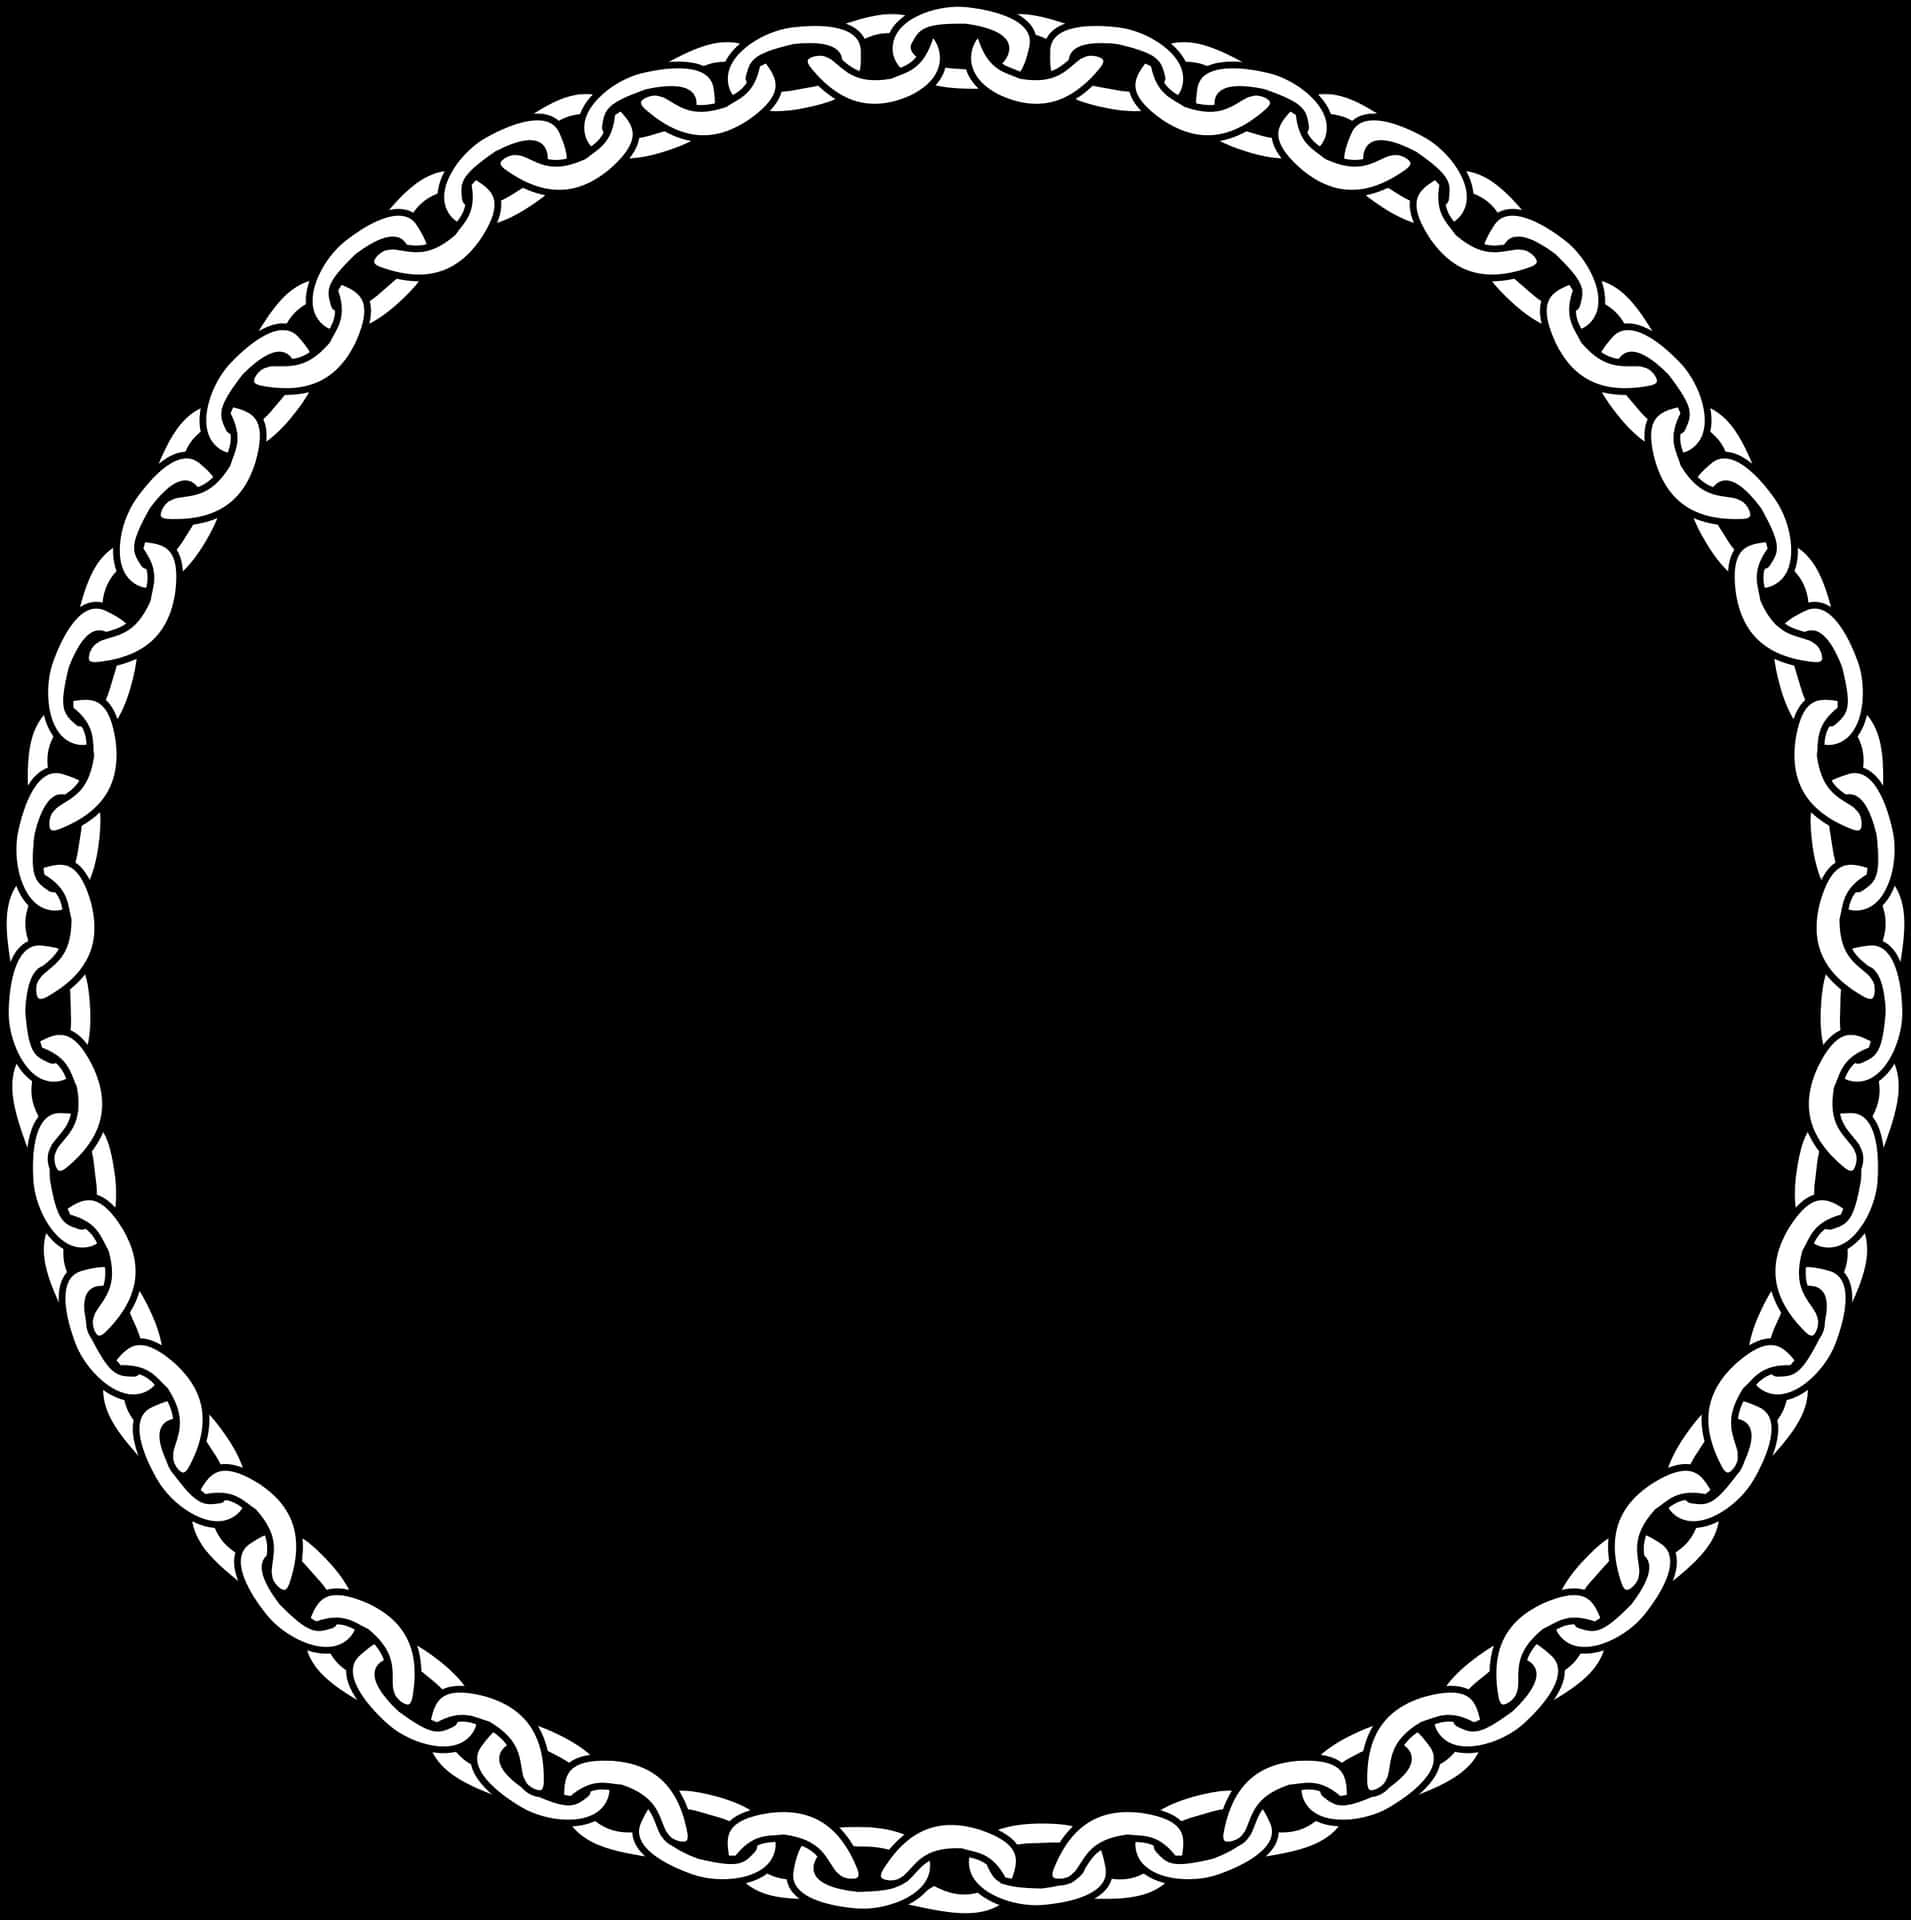 Circular Chain Frame Graphic PNG